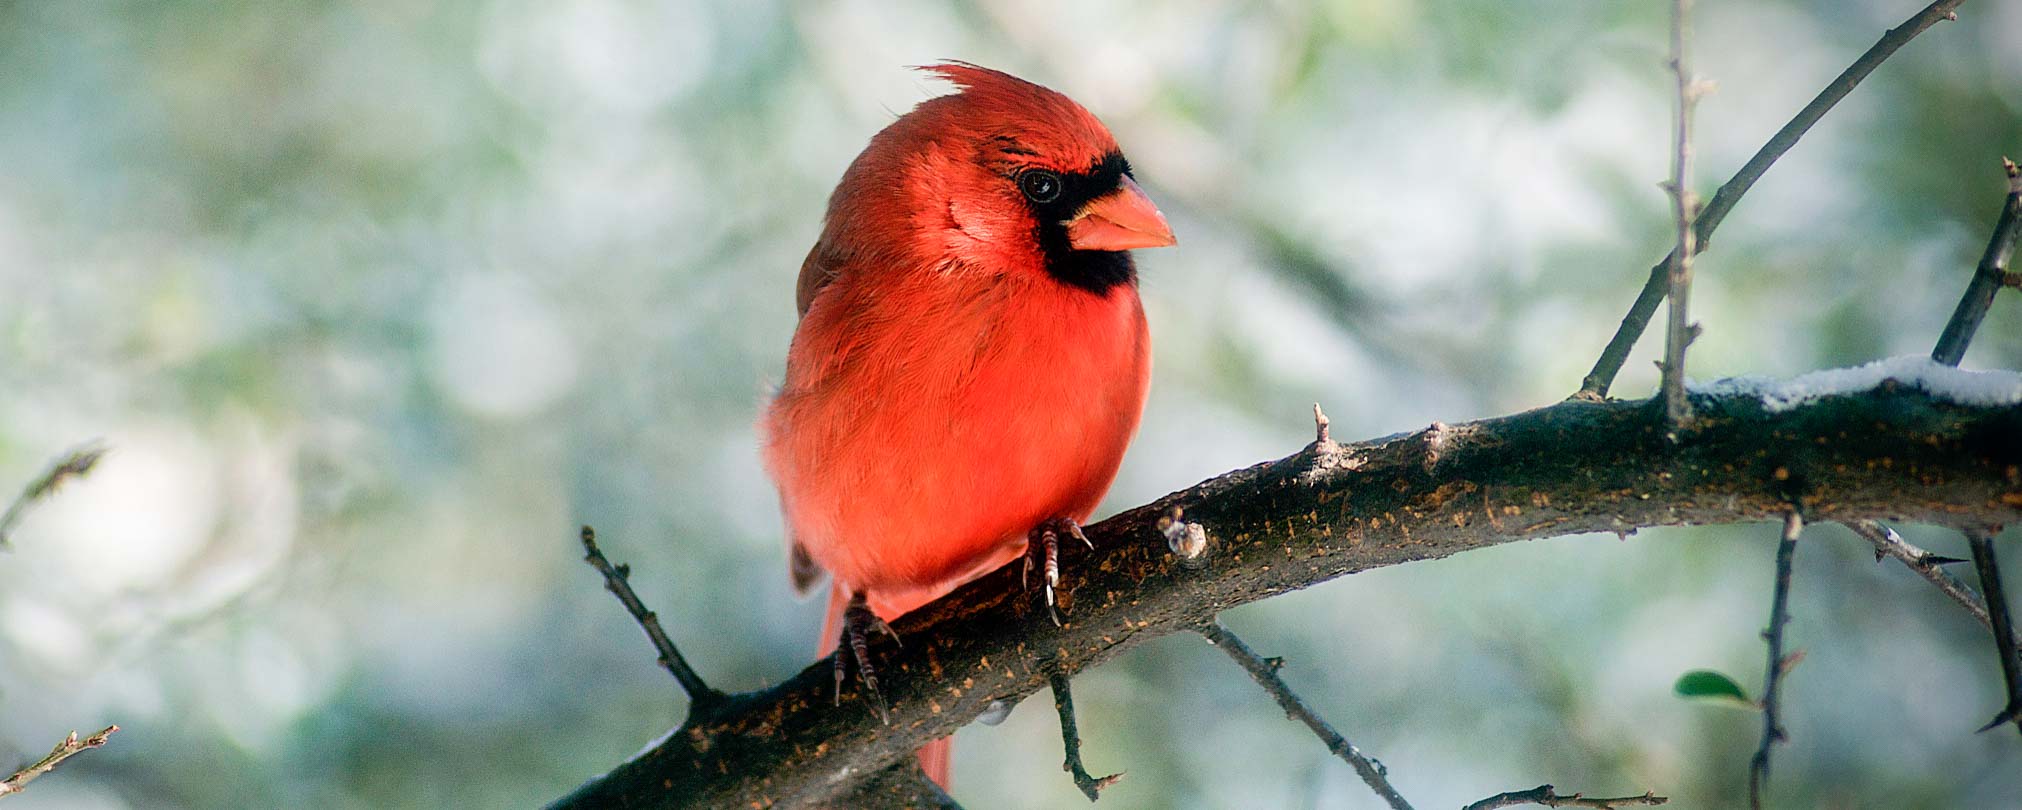 Cardinal on branch in winter